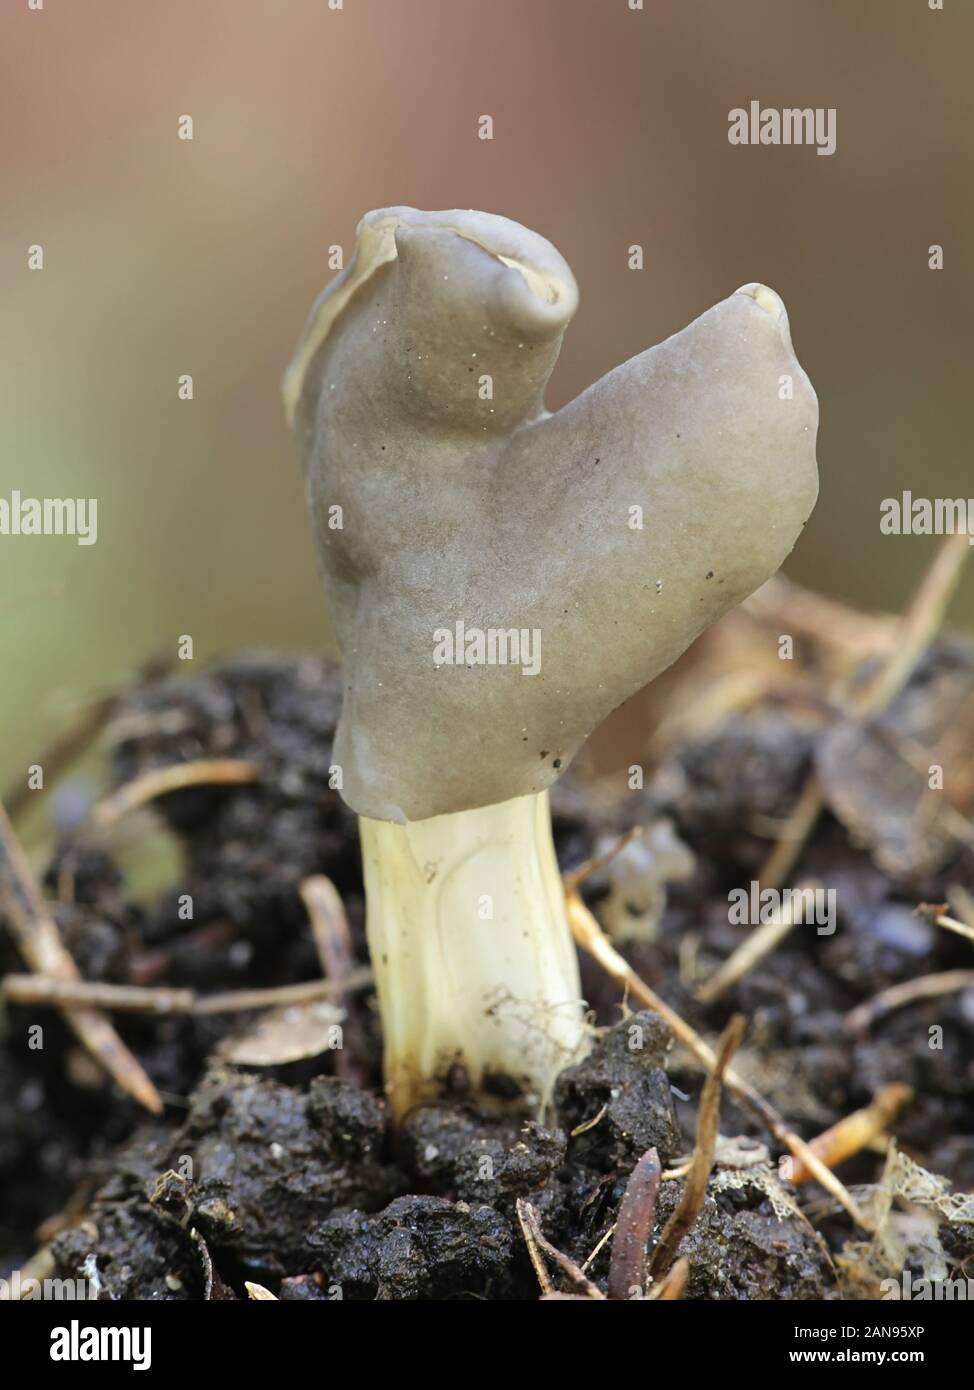 Helvella lacunosa, known as the slate grey saddle or fluted black elfin saddle, mushrooms from Finland Stock Photo